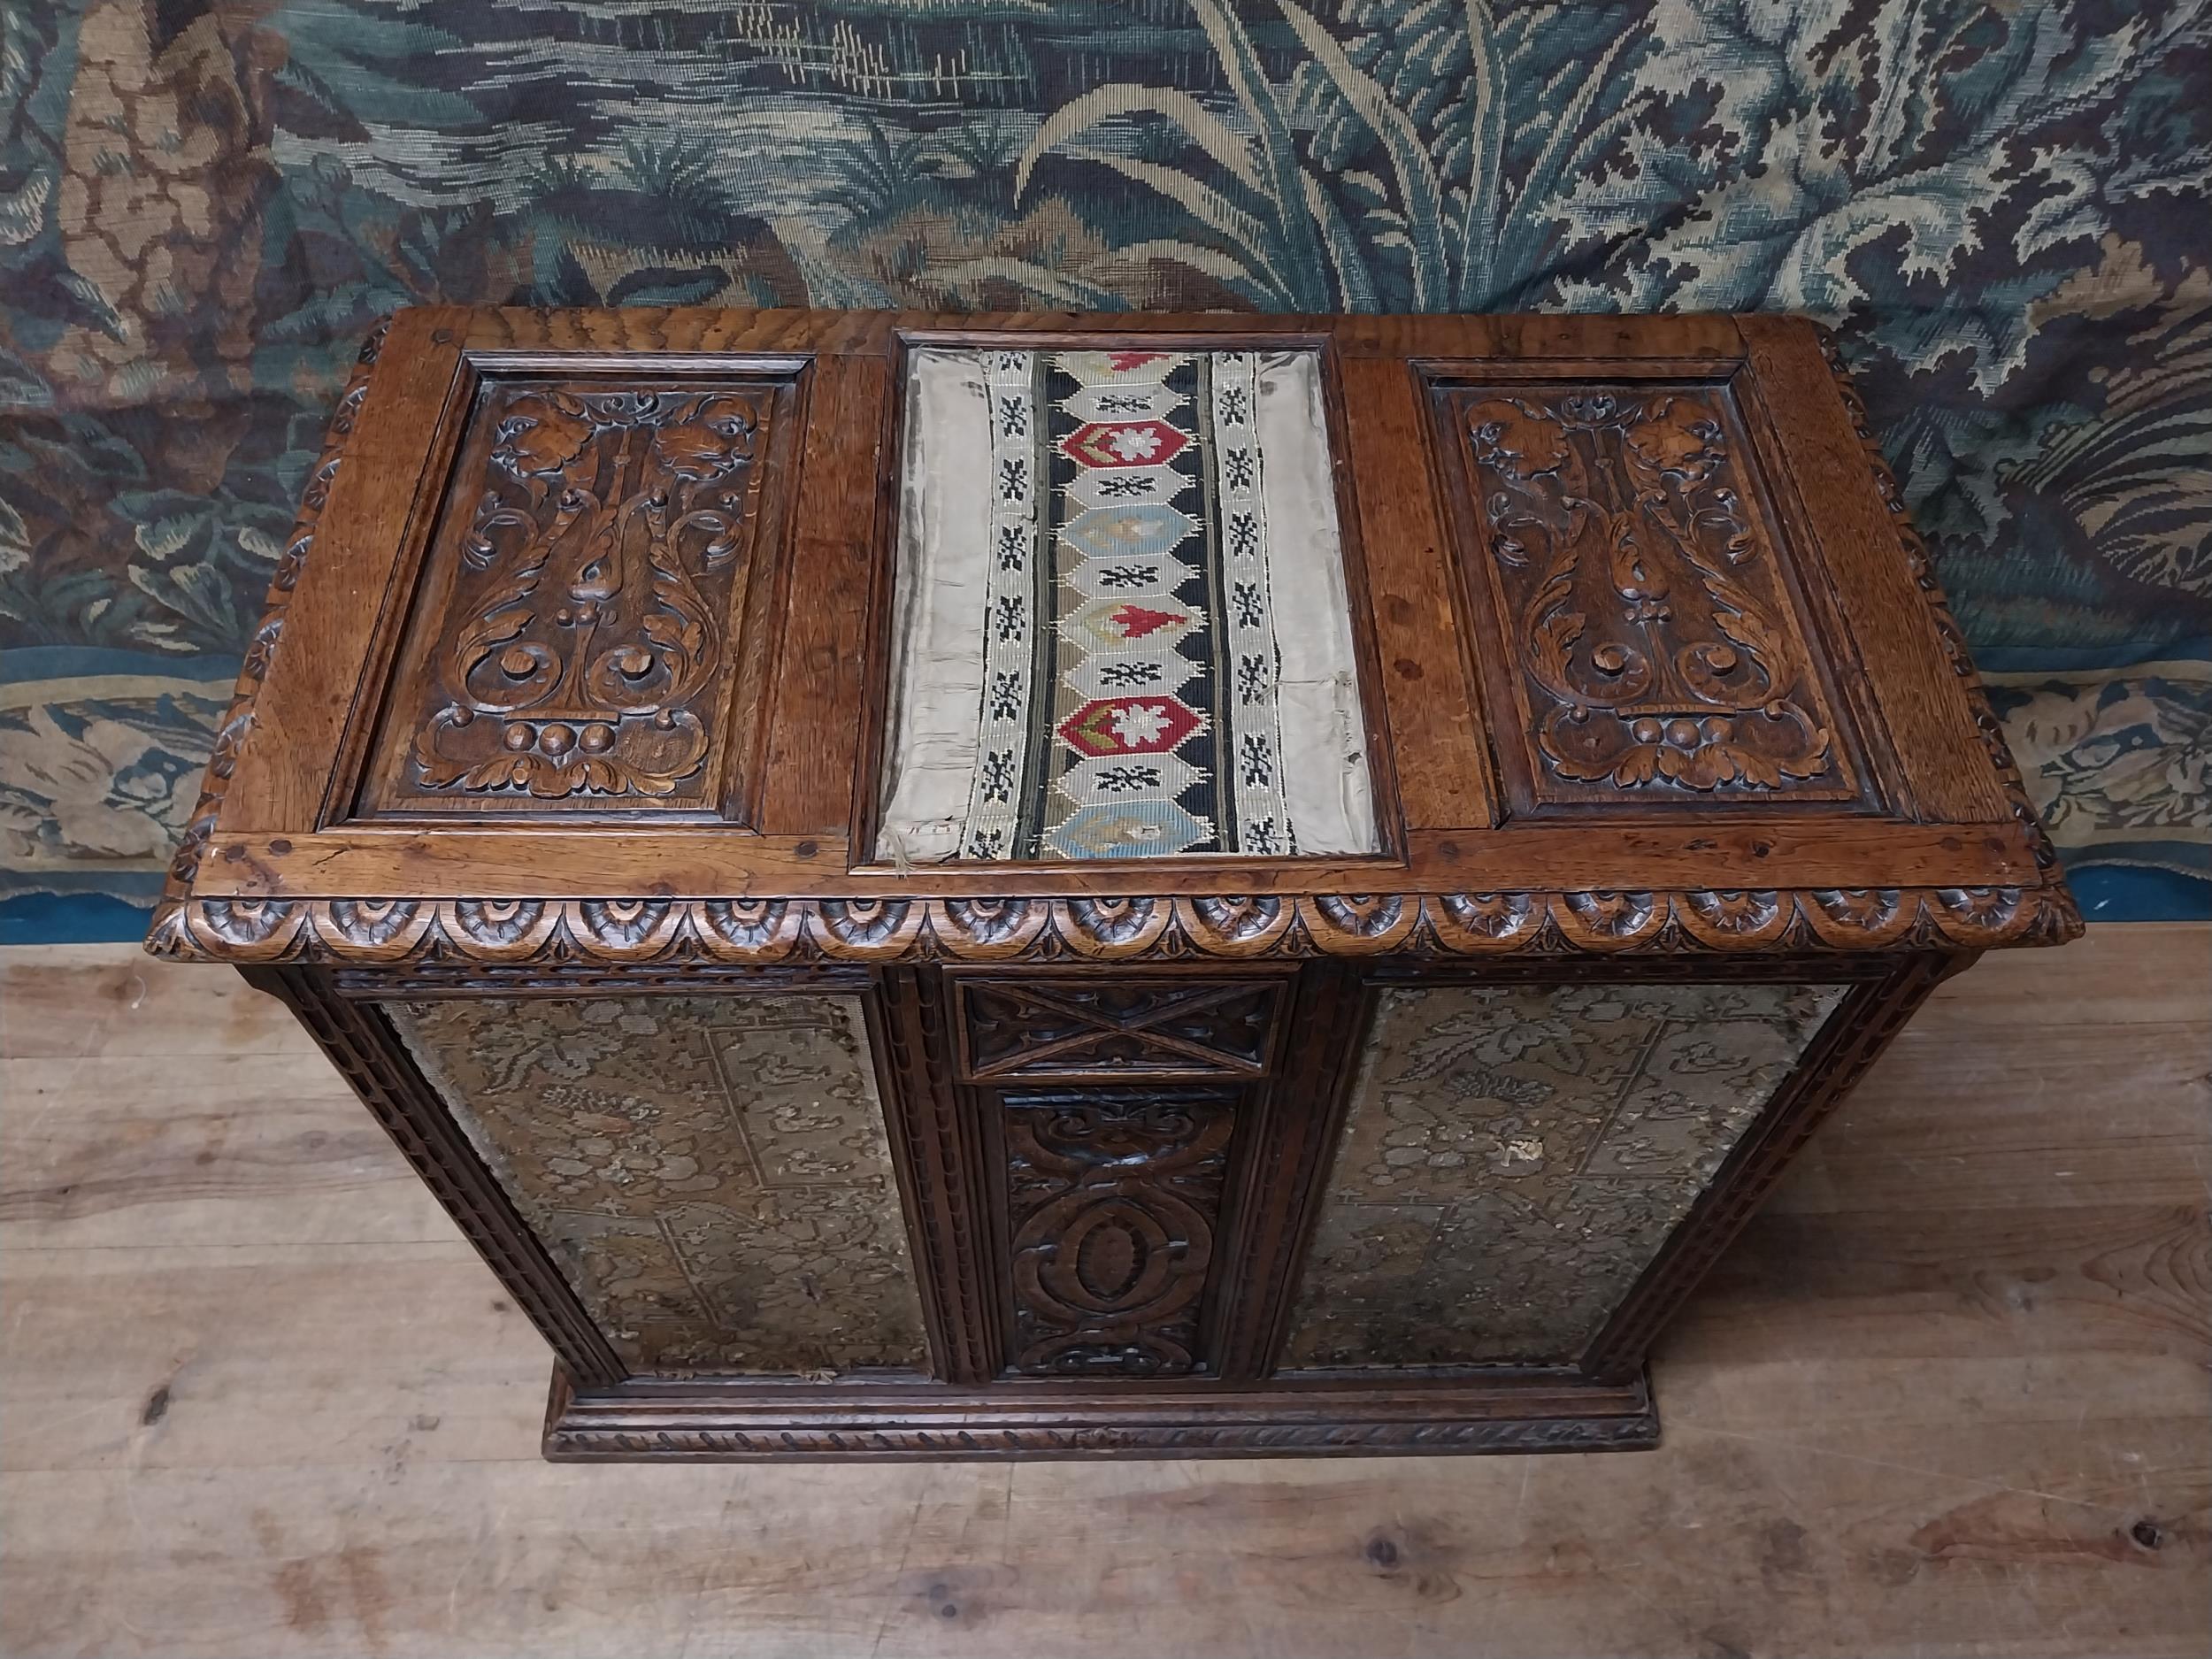 19th C. carved oak blanket box with tapestry panels {75 cm H x 85 cm W x 44 cm D}. - Image 3 of 8